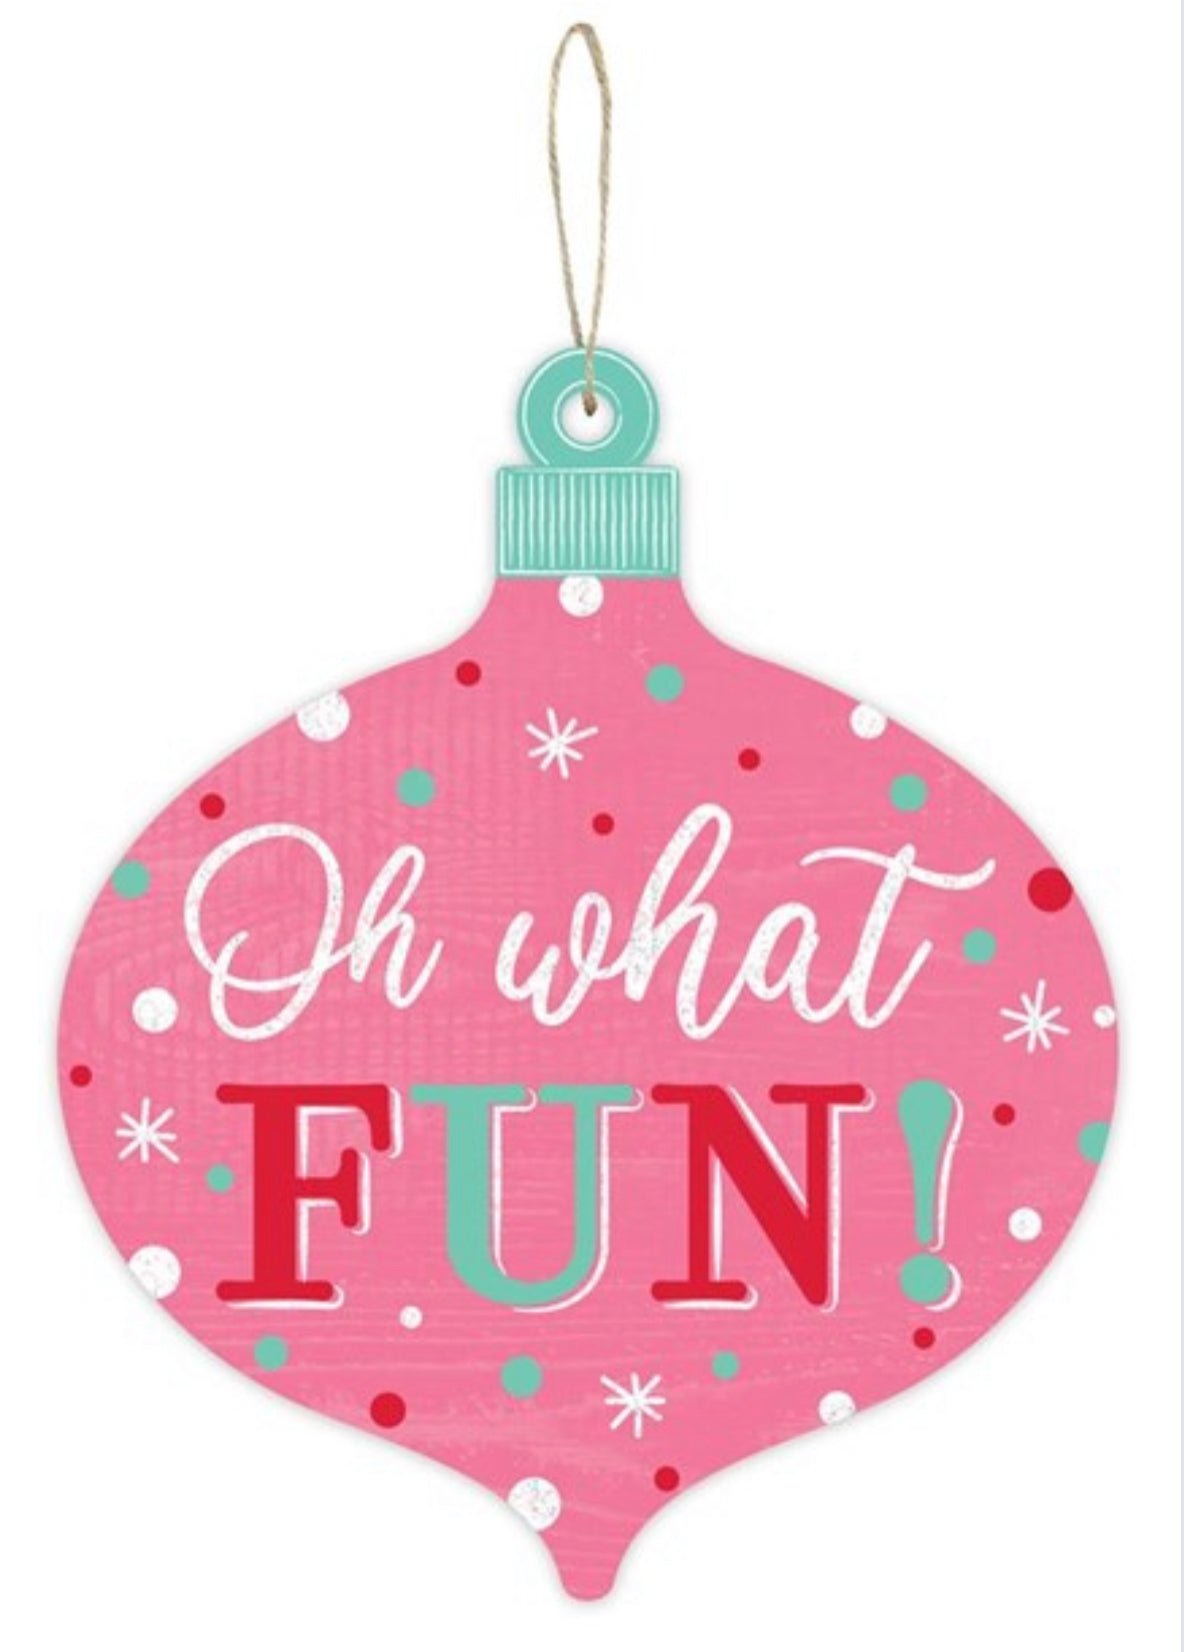 Oh what fun ornament sign -pink, red, and mint - Greenery Marketsigns for wreathsAP896022